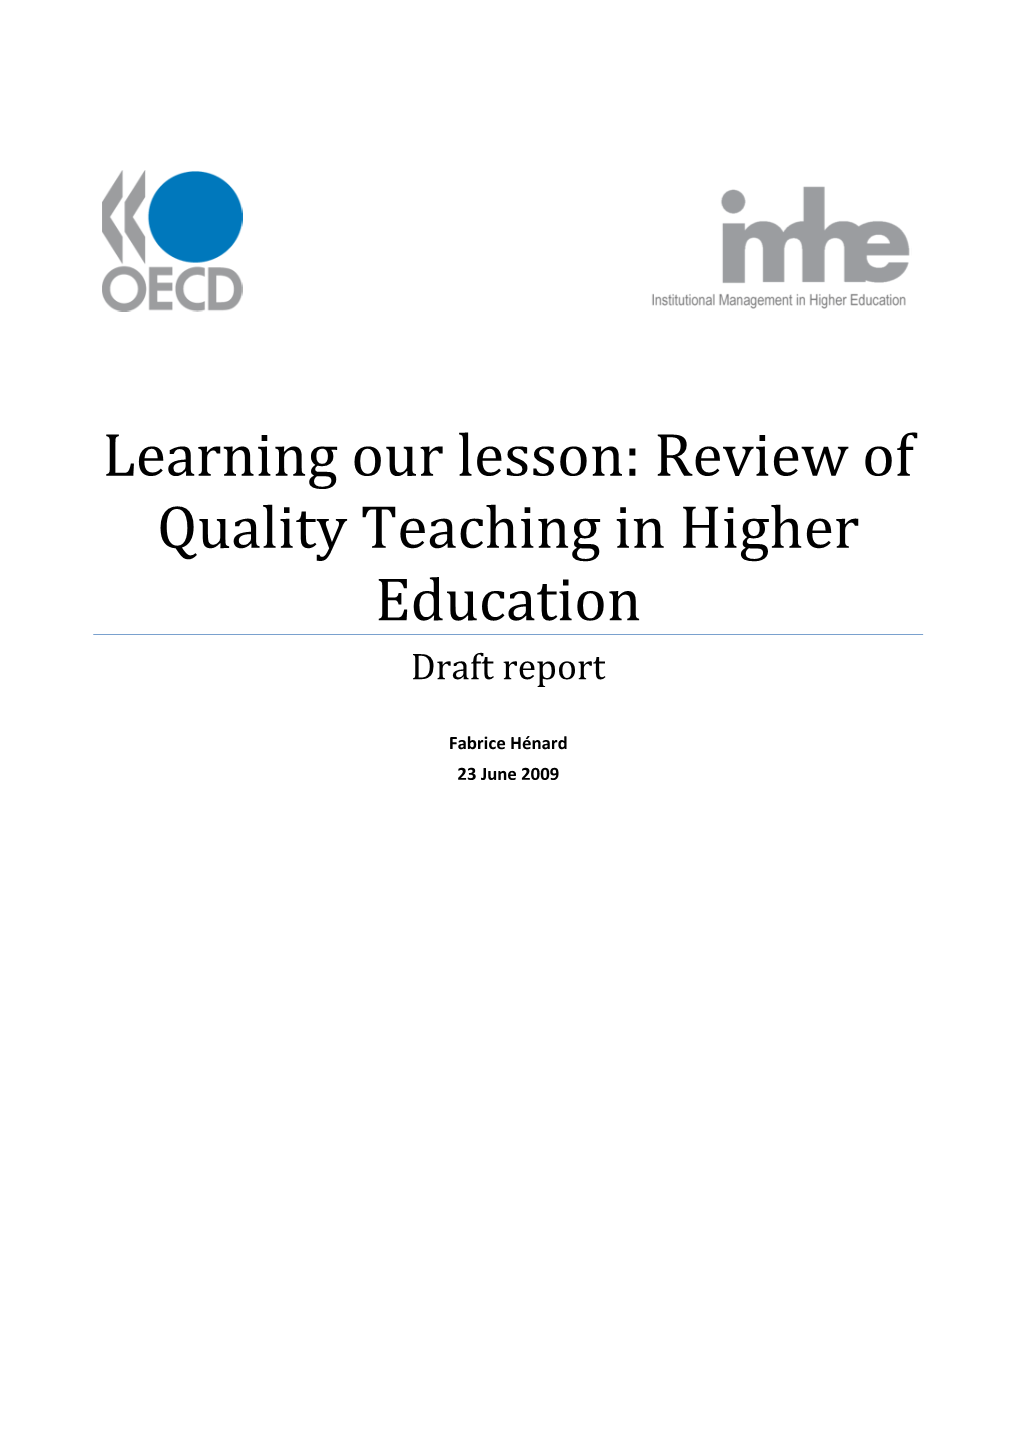 Learning Our Lesson: Review of Quality Teaching in Higher Education Draft Report